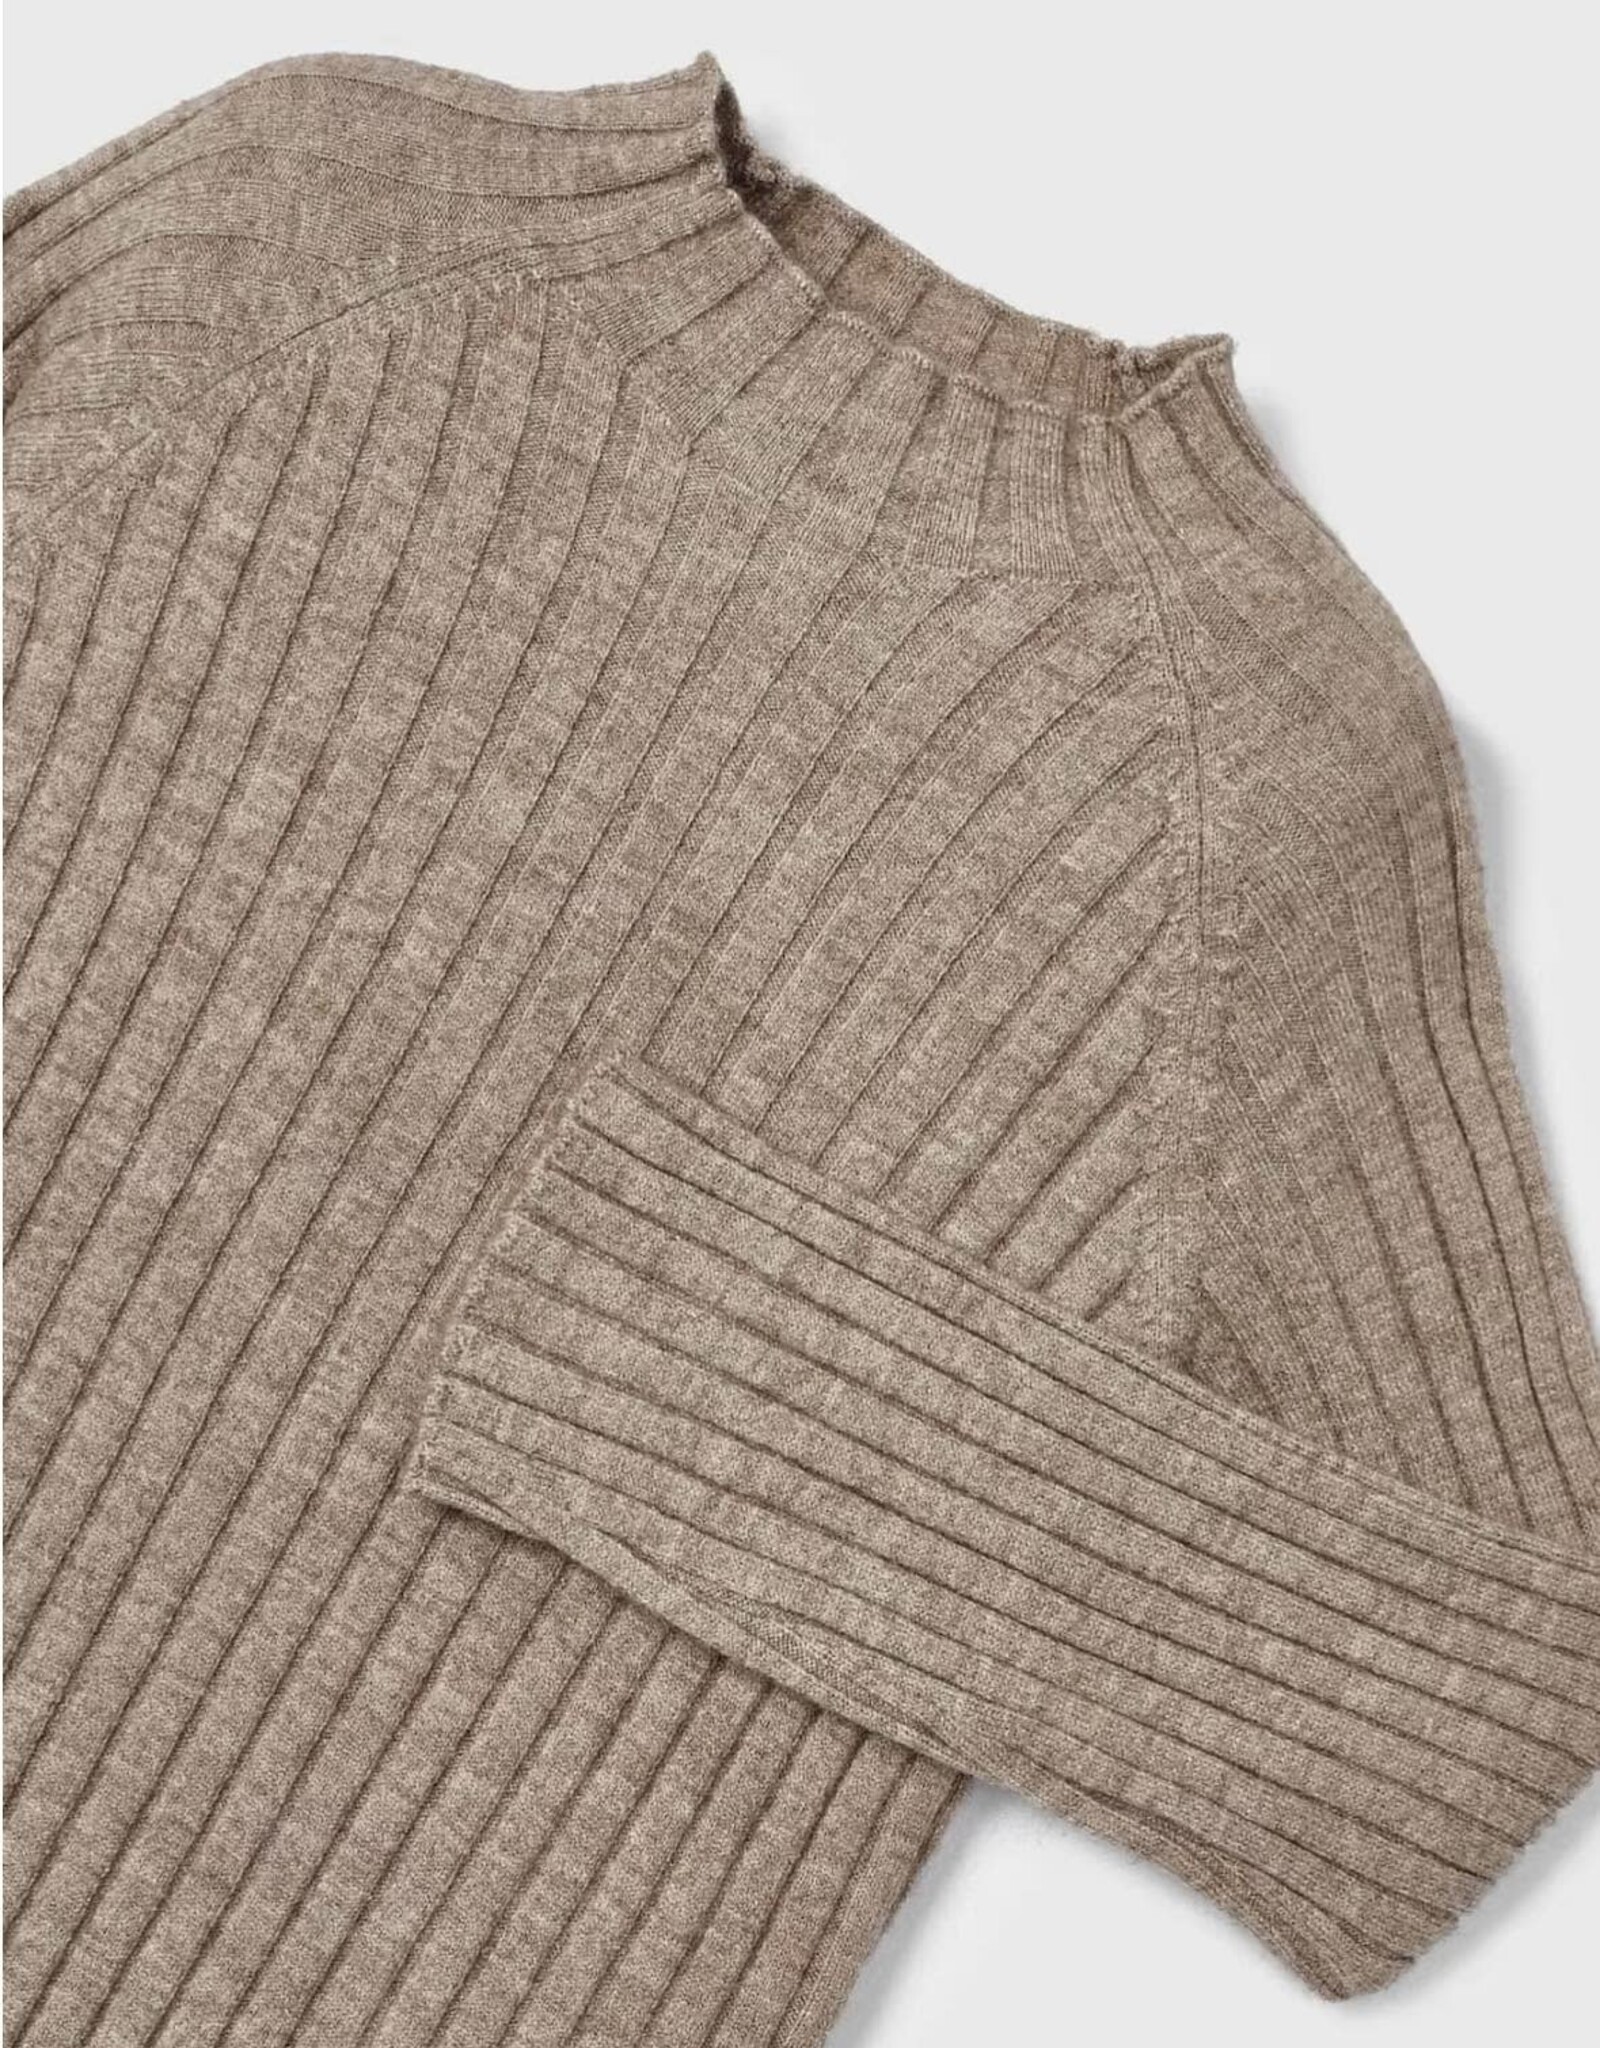 Mayoral Lexi Mock Neck Top in Taupe